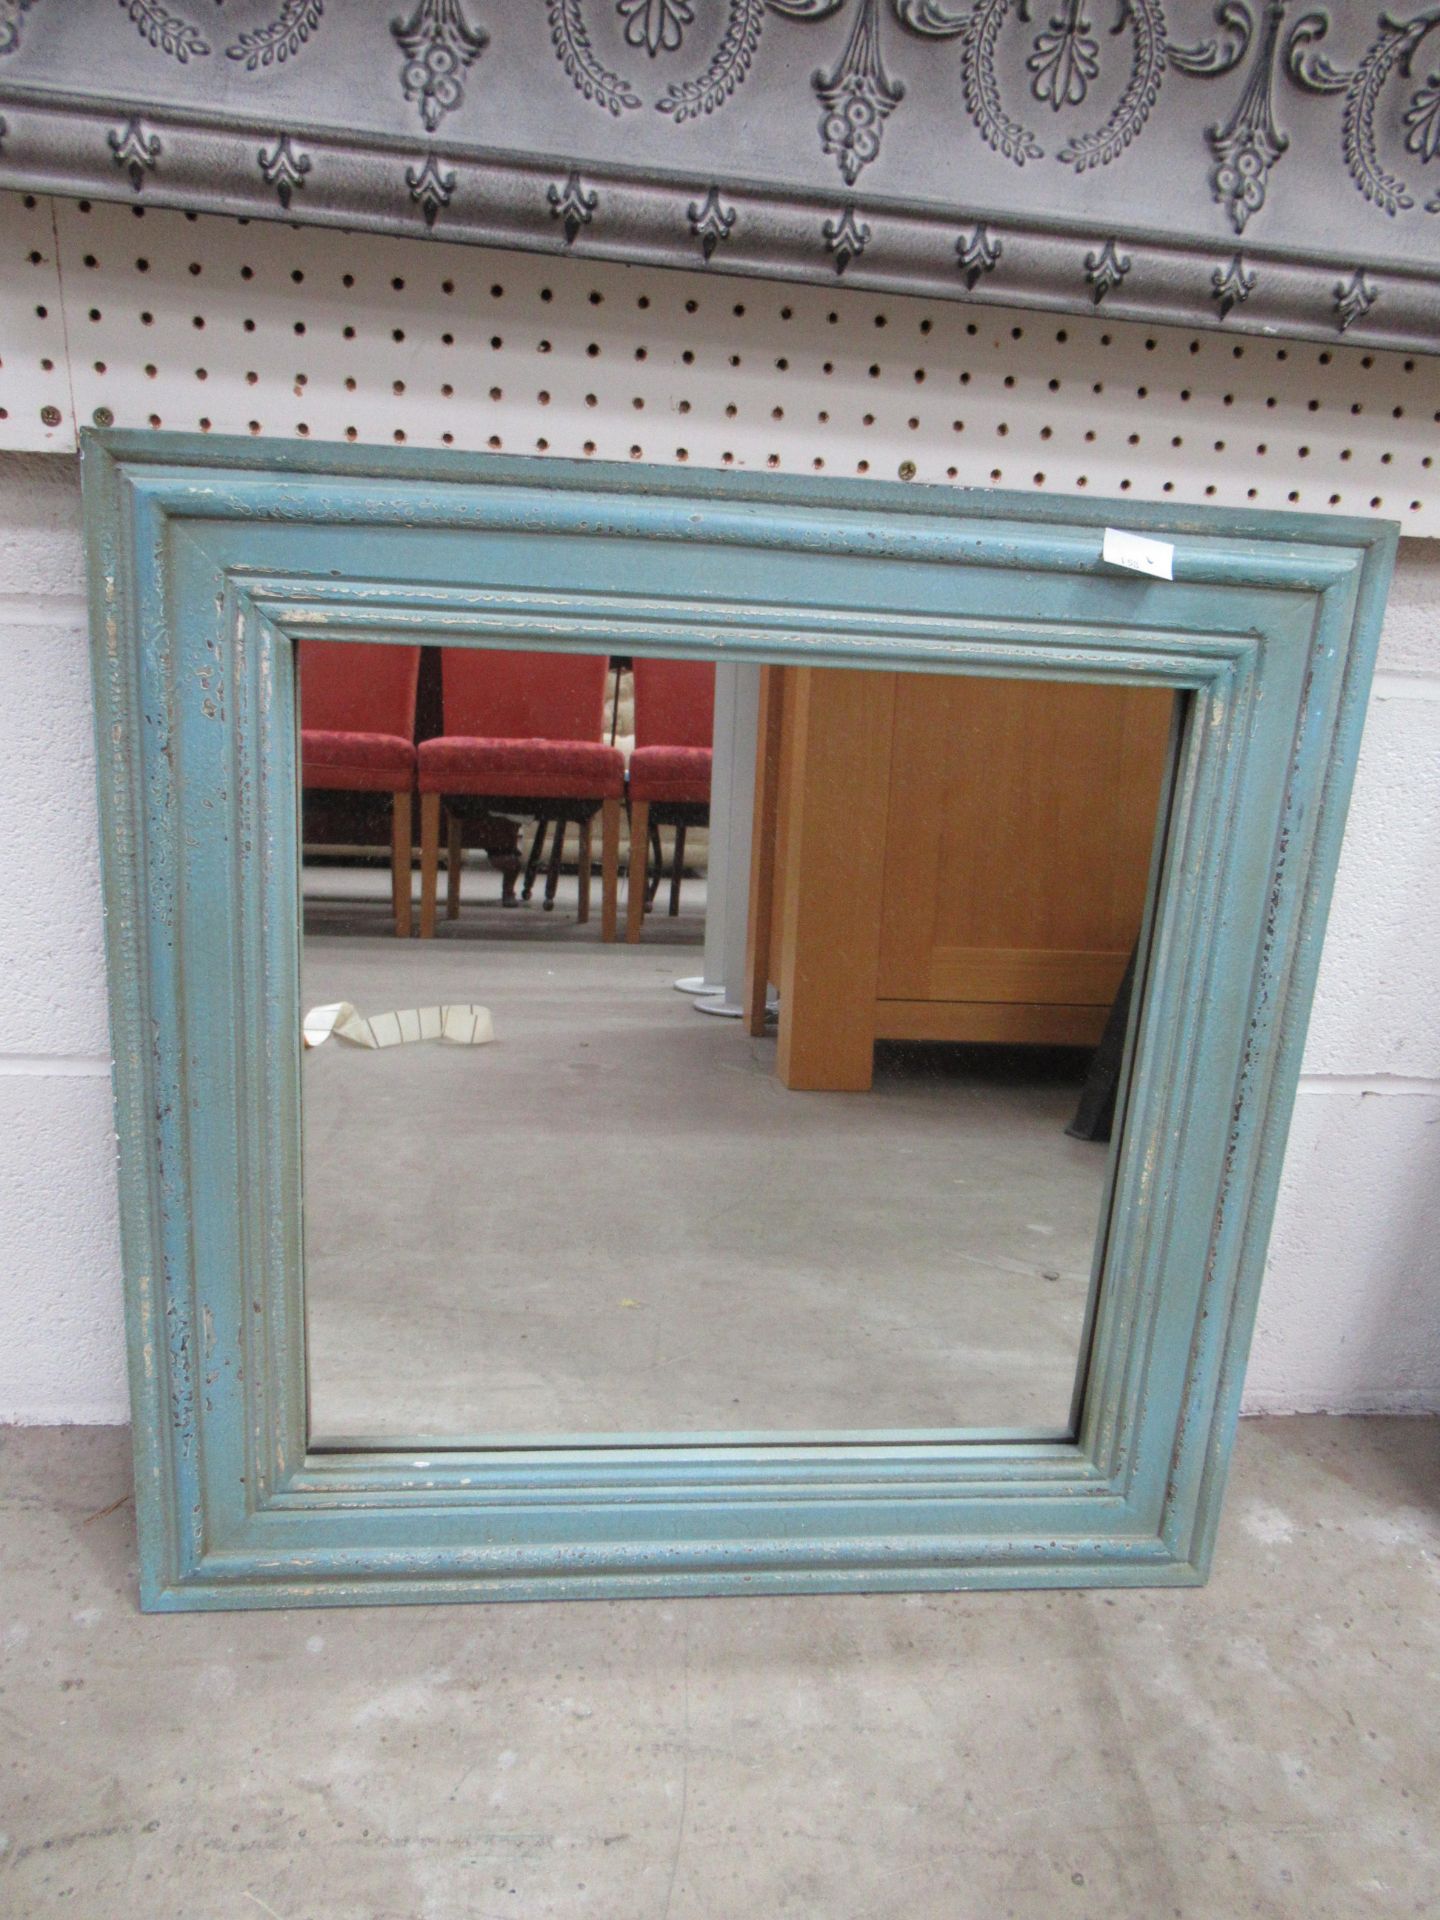 3x wall hanging mirrors - Image 2 of 4